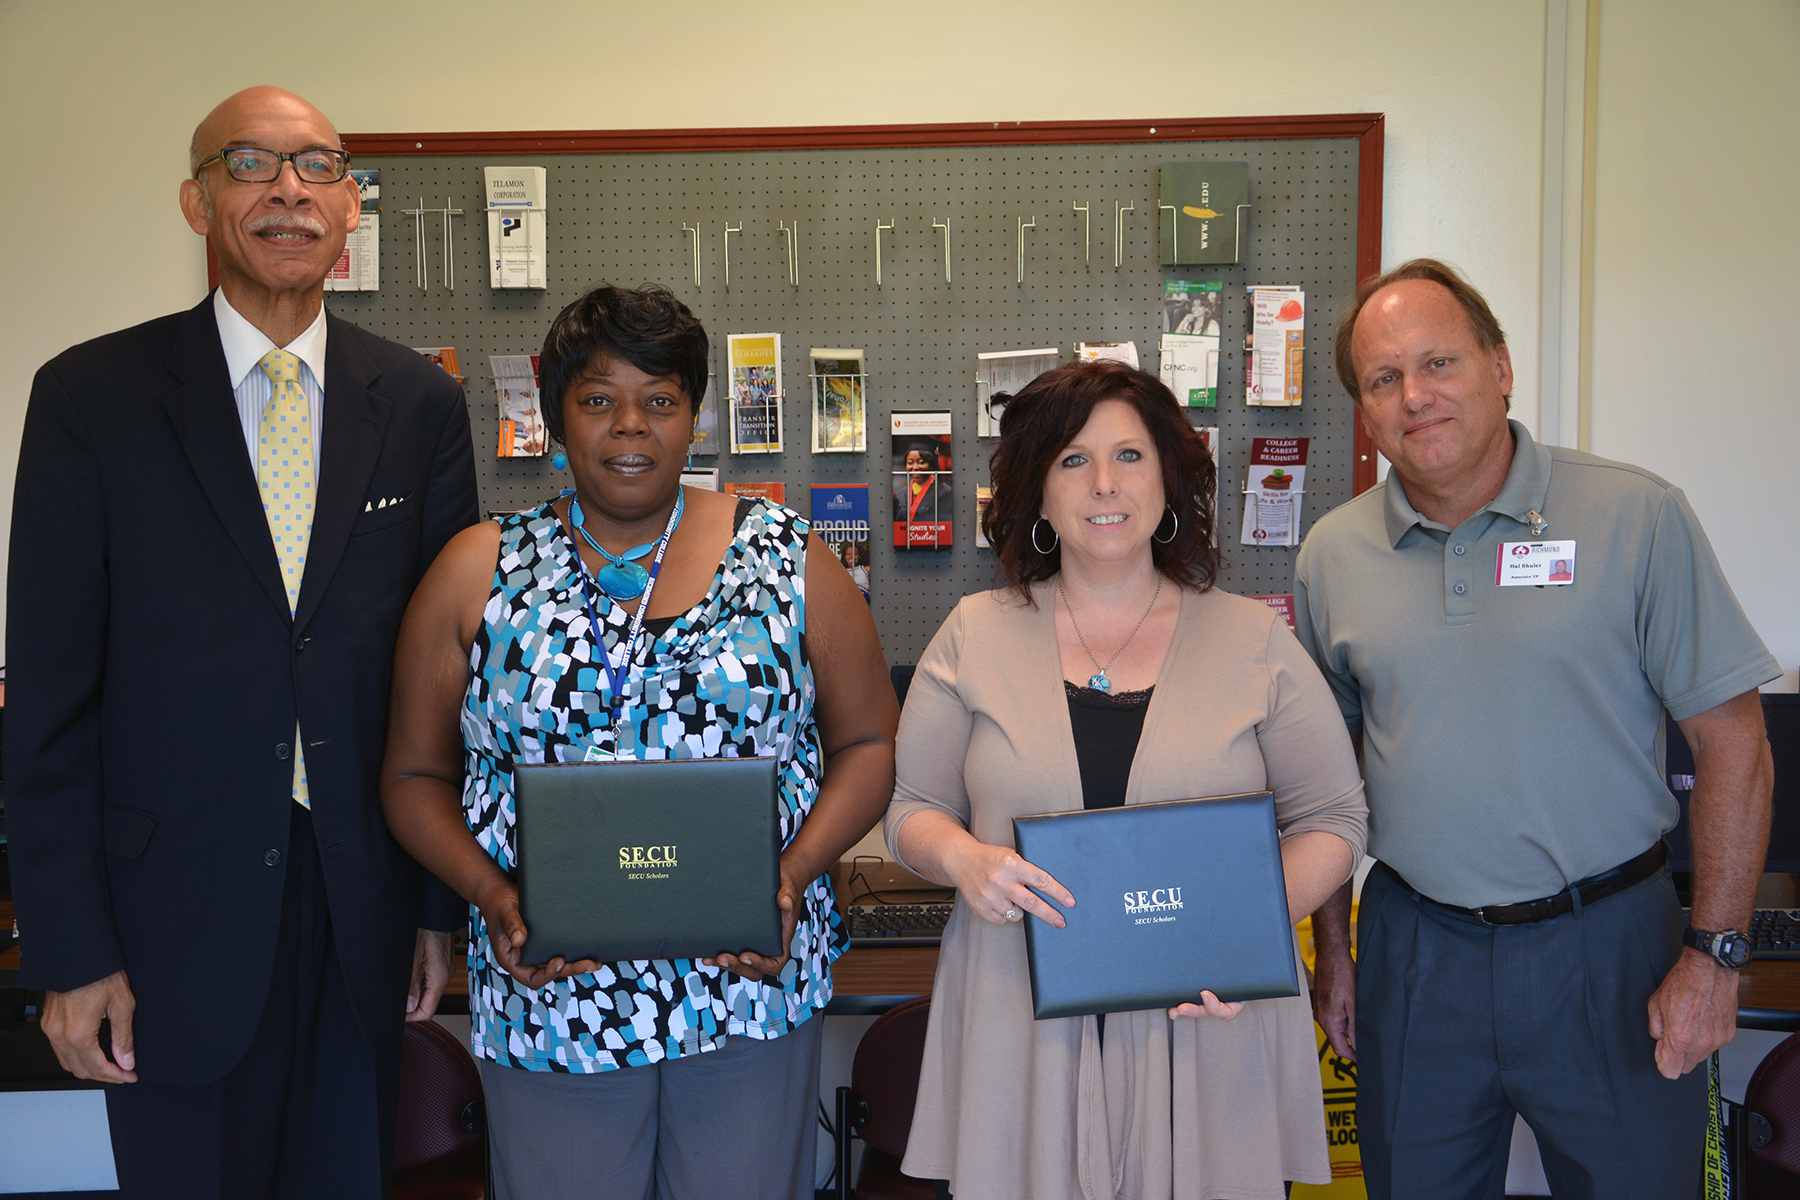 From left, State Employees Credit Union Vice President City Executive Douglas M. Fulford Jr. stands with People Helping People Scholarship recipients Gyvonna Bowman and Nancy McIntyre and Associate Vice President for Development Dr. Hal Shuler at Richmond Community College.